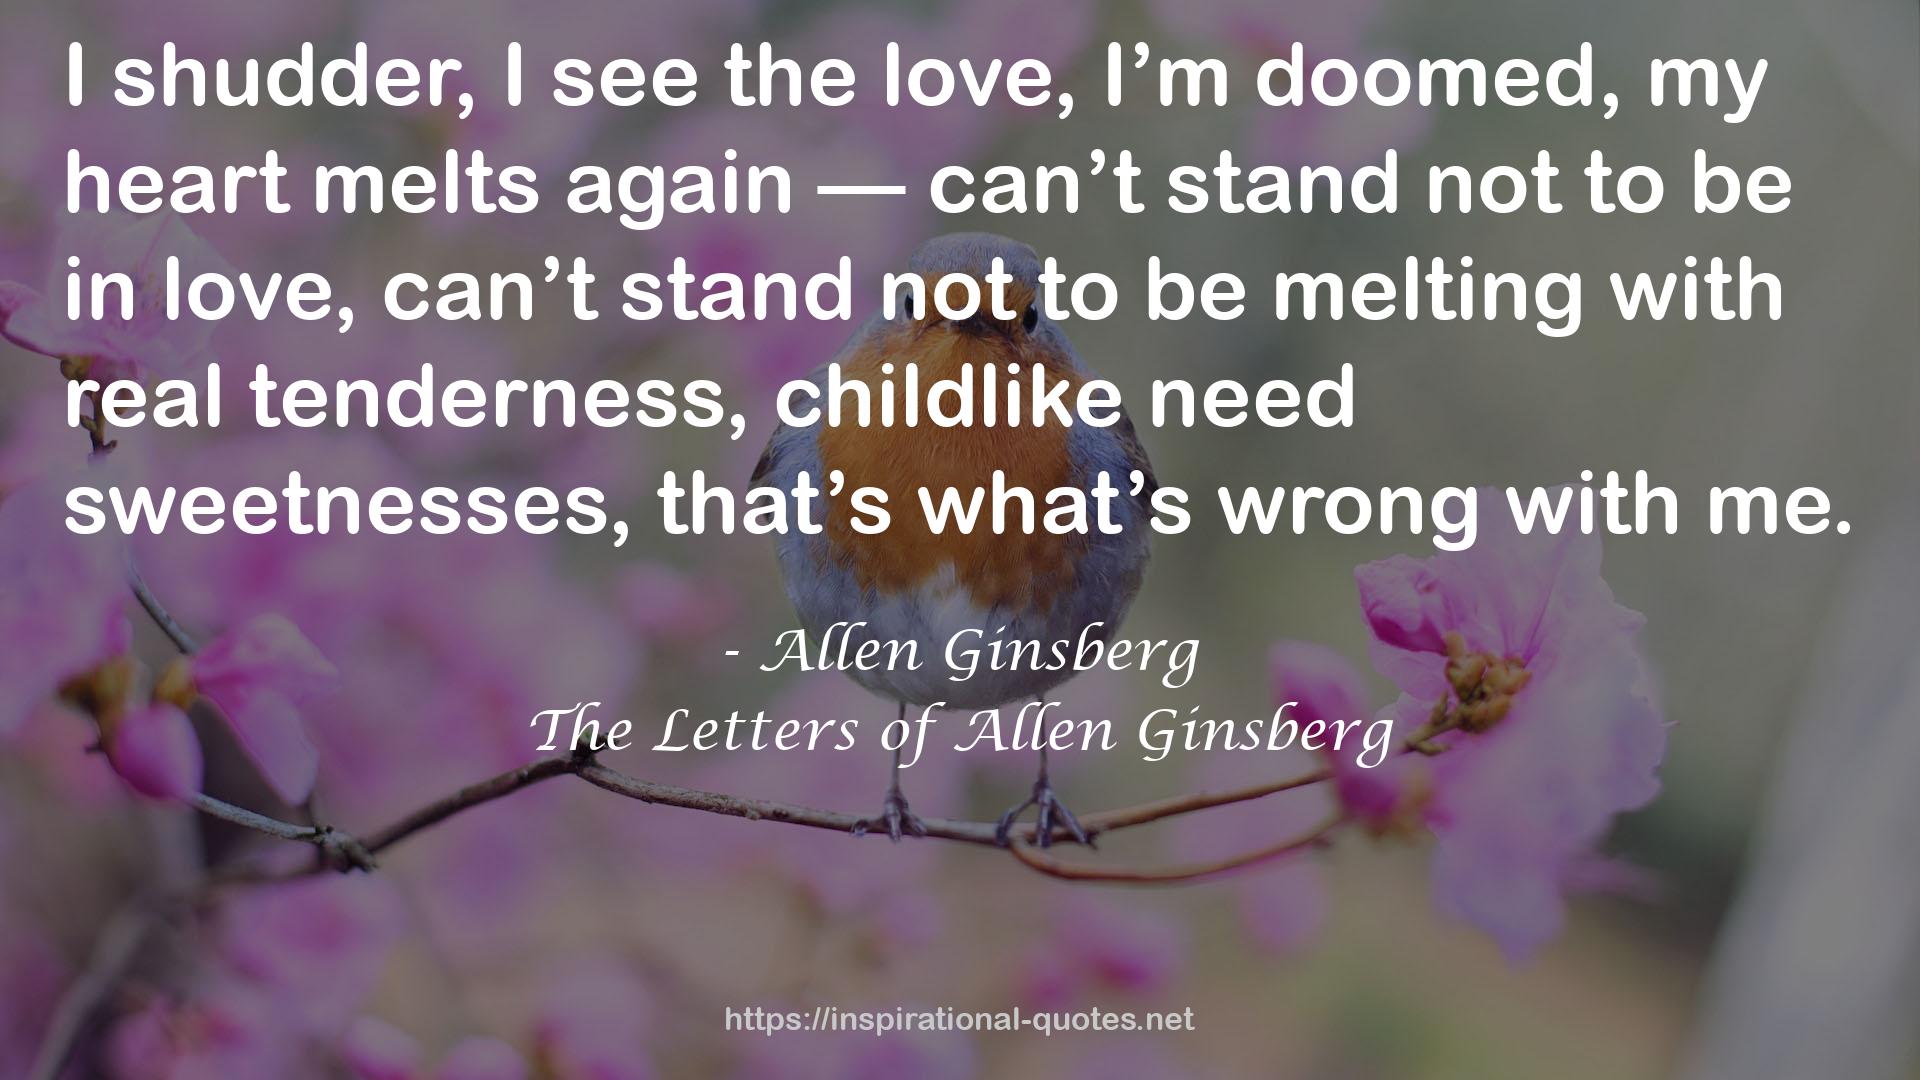 The Letters of Allen Ginsberg QUOTES